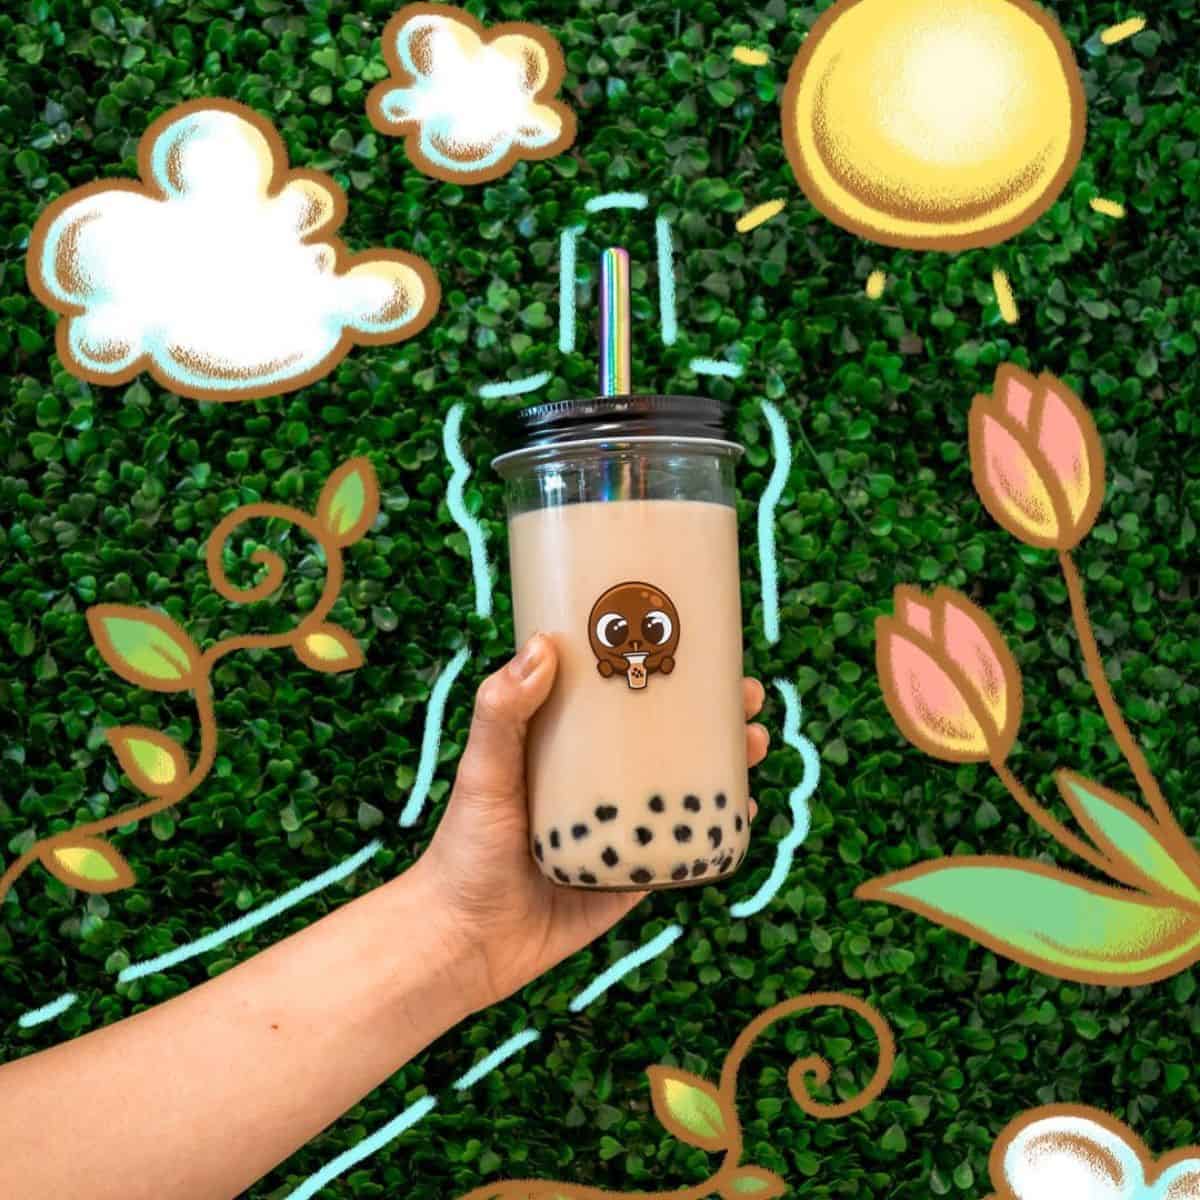 For those of you thinking to get a reusable bubble tea cup, here's